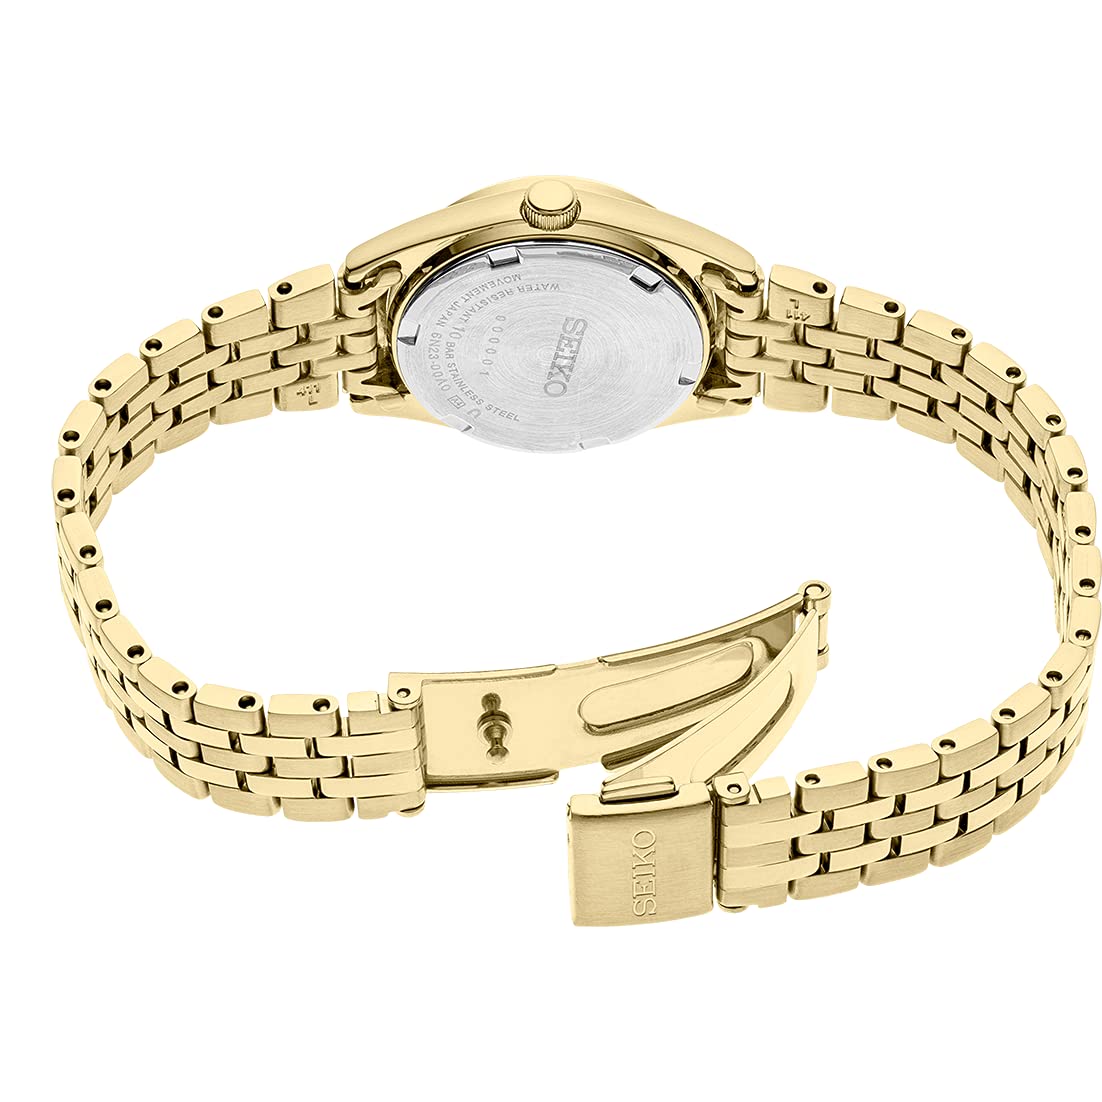 SEIKO SUR440 Watch for Women - Essentials Collection - Gold-Tone Stainless Steel Case and Bracelet, White Dial